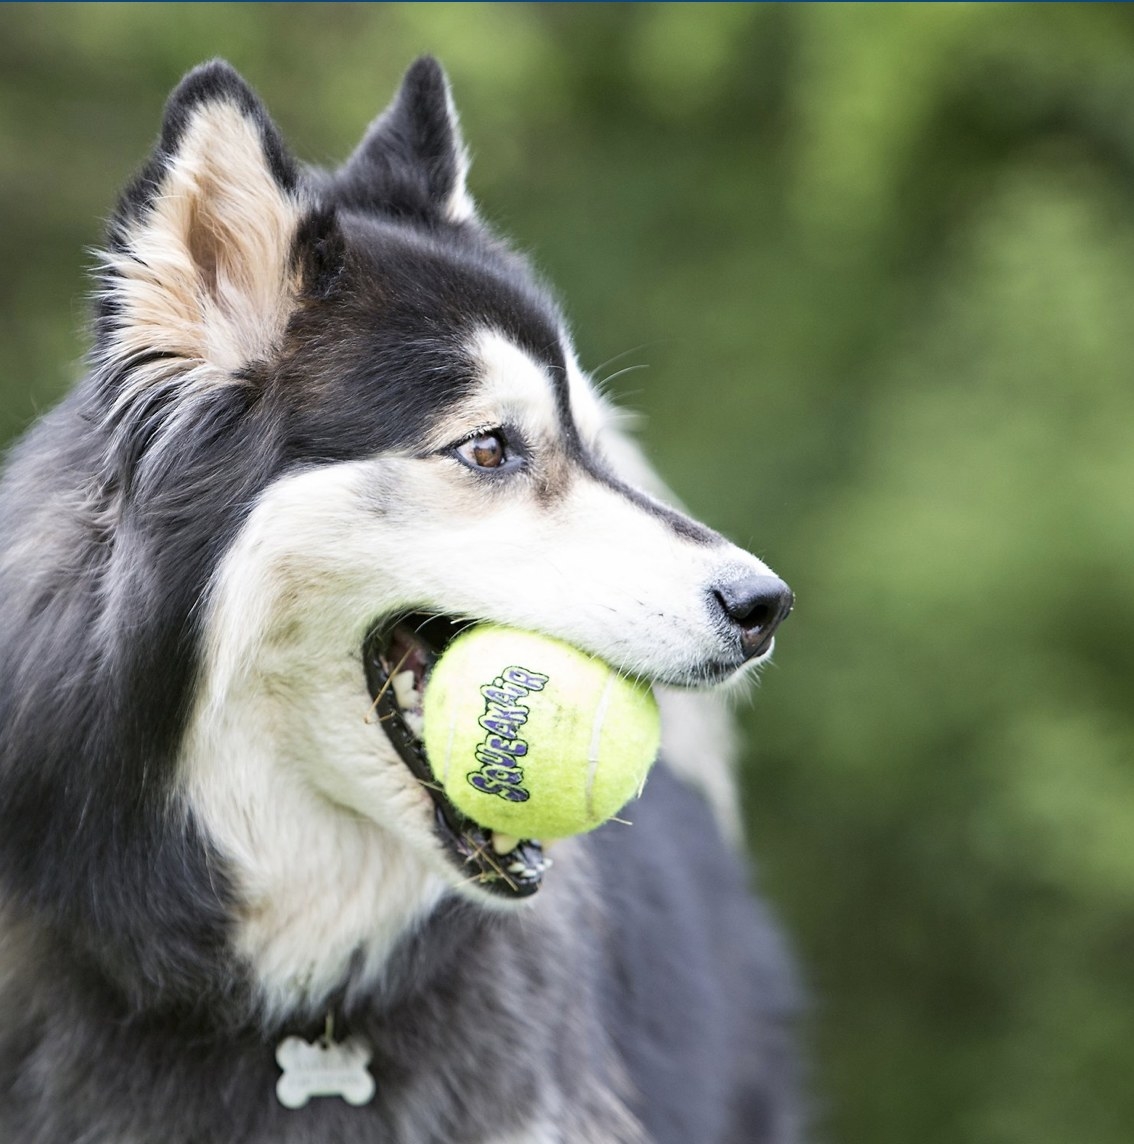 A gray and white dog with a yellow ball in its mouth